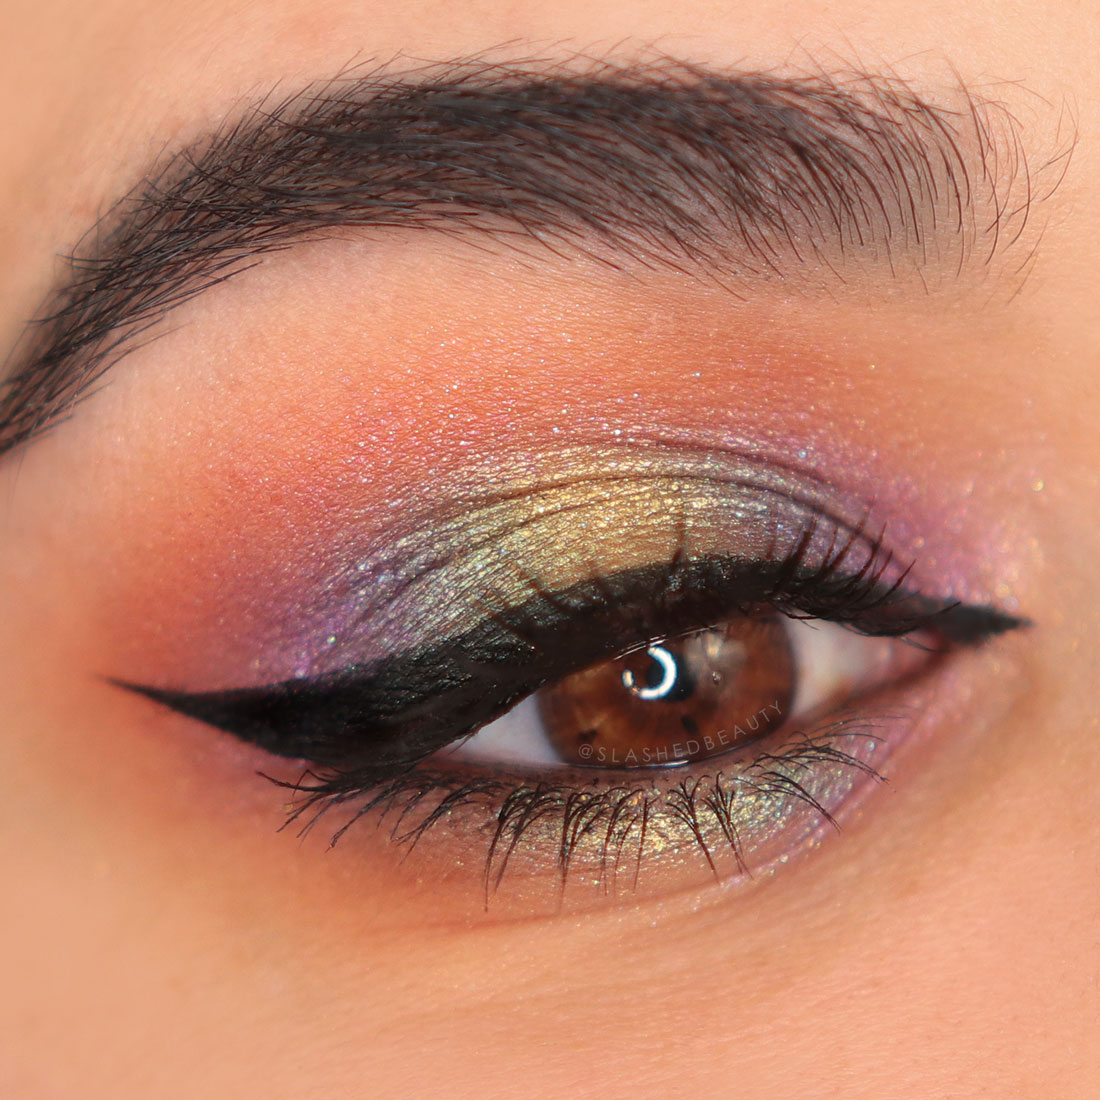 Eye look created with the L.A. Girl Festie Bestie Eyeshadow Palette | L.A. Girl Festie Bestie Eyeshadow Palette Swatches & Review | Slashed Beauty